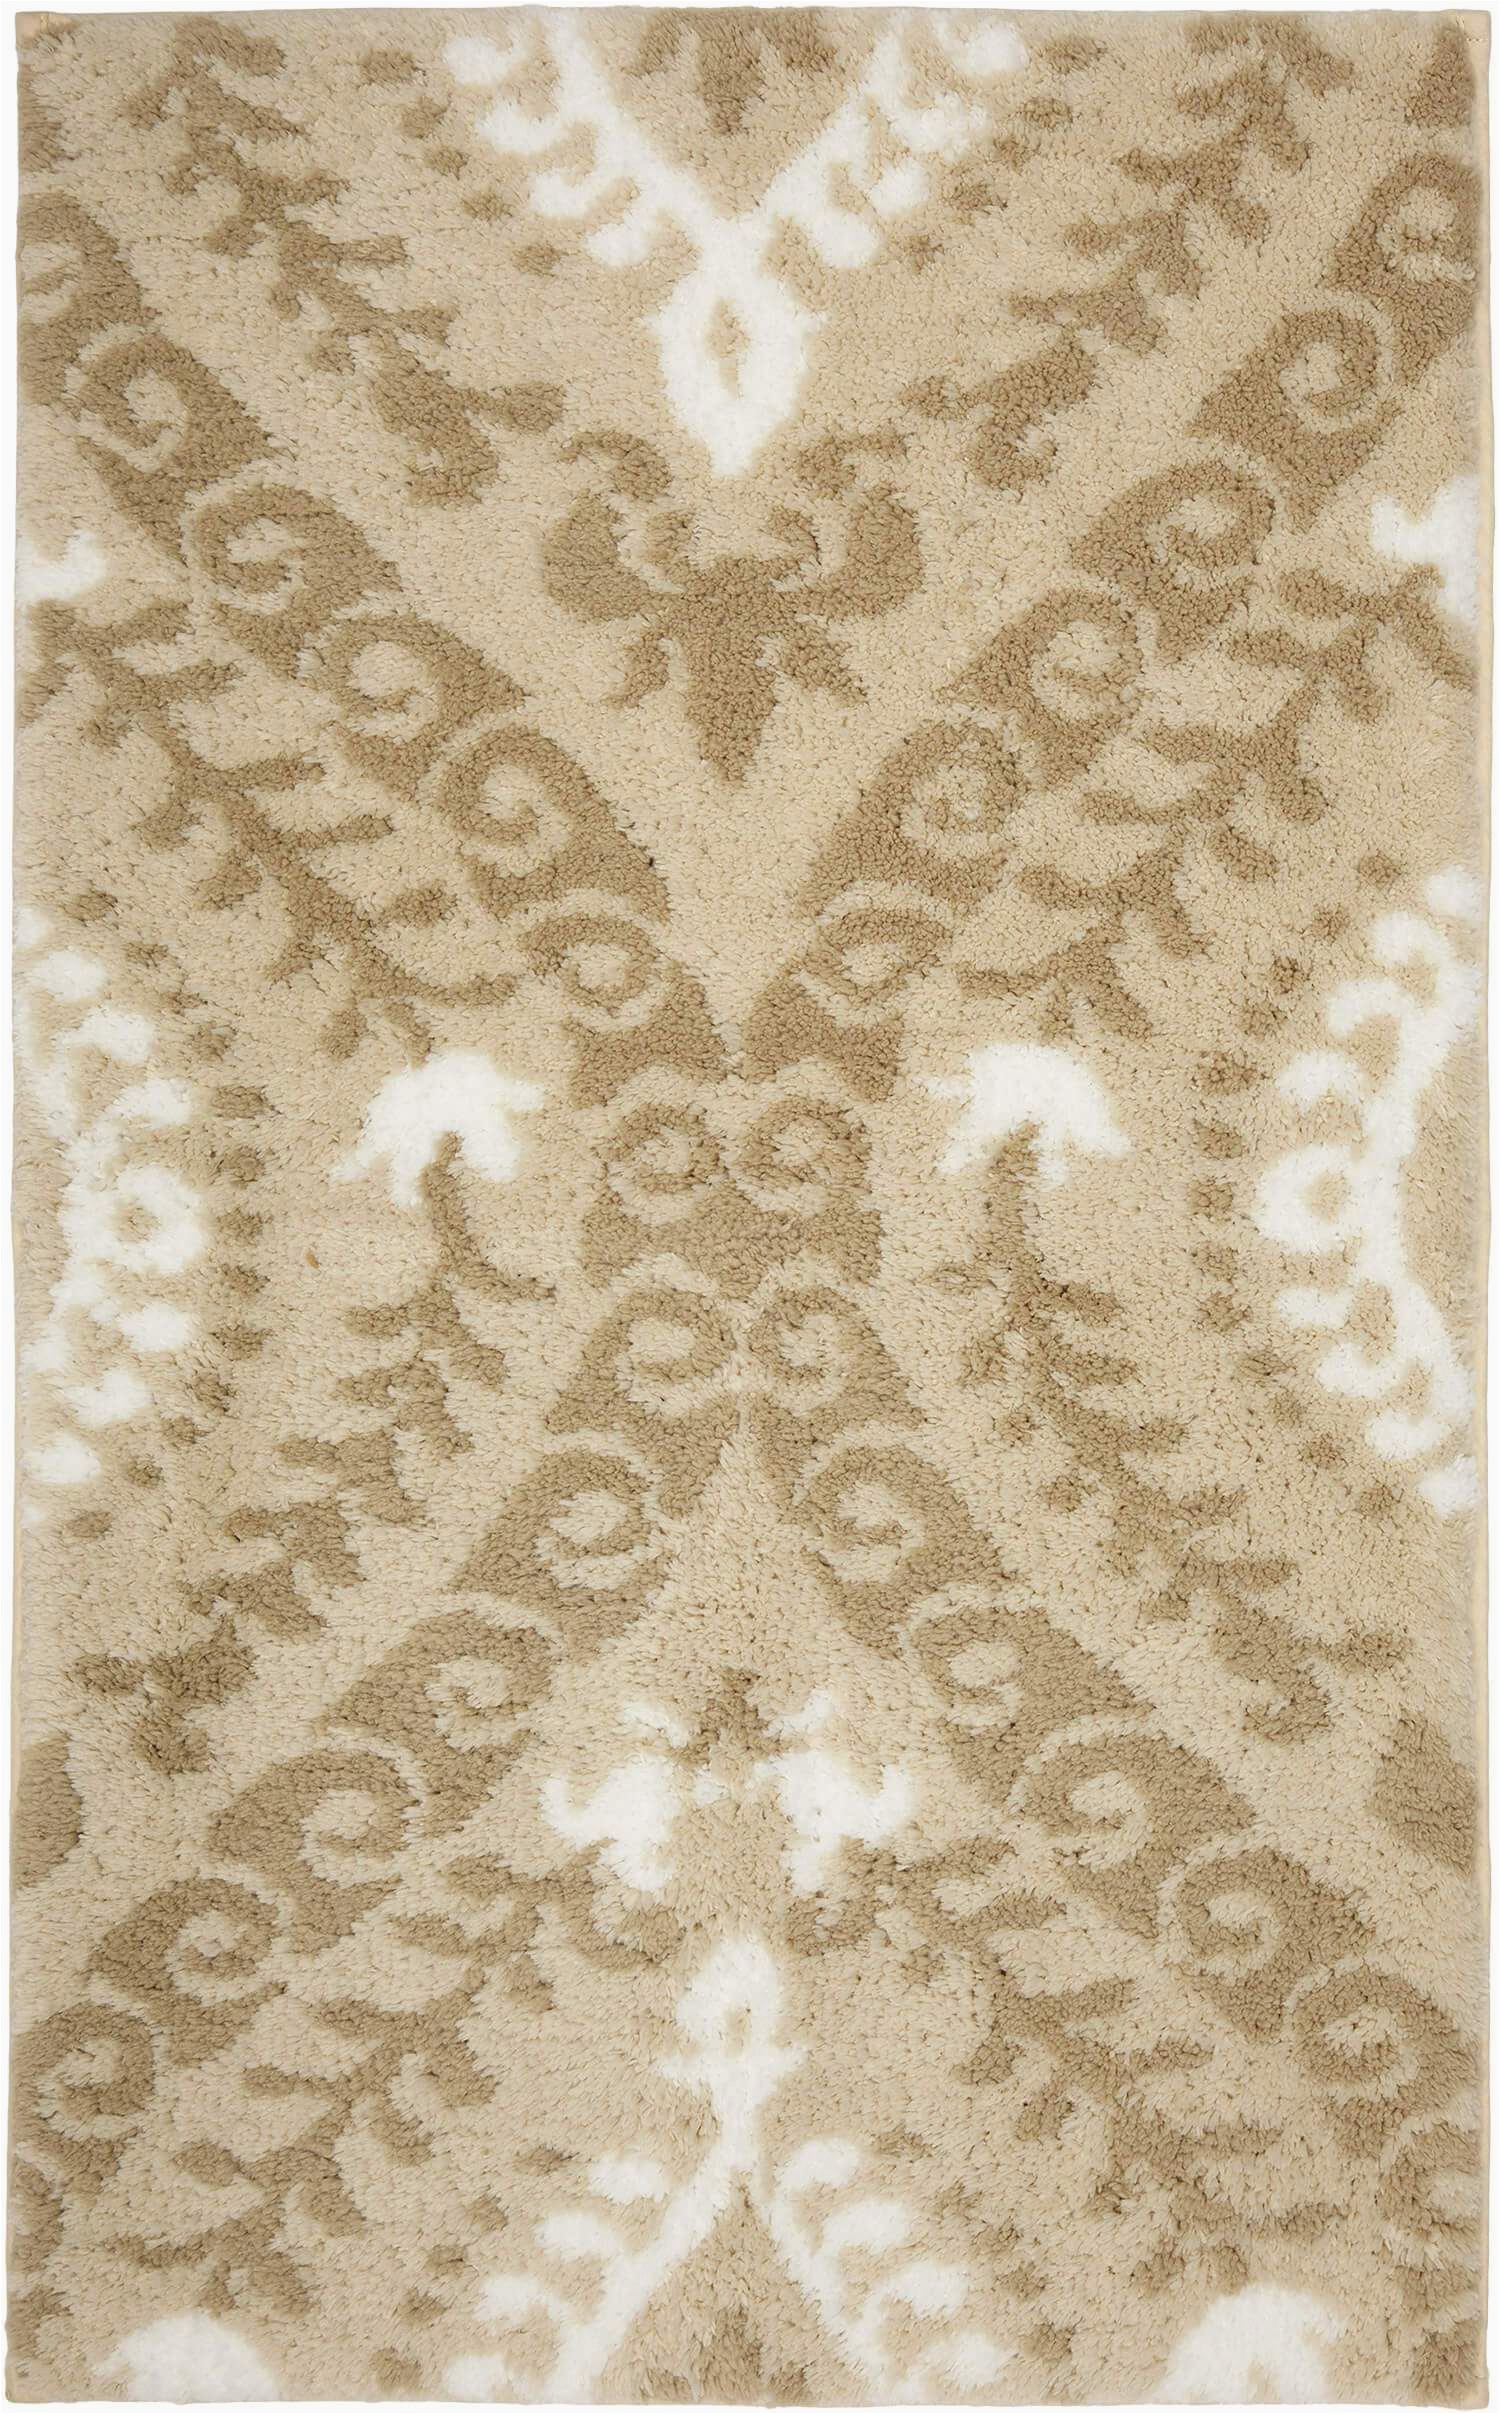 Brown and White Bathroom Rugs Pass Driftwood Brown & White Bath Mat Bath Bathroom